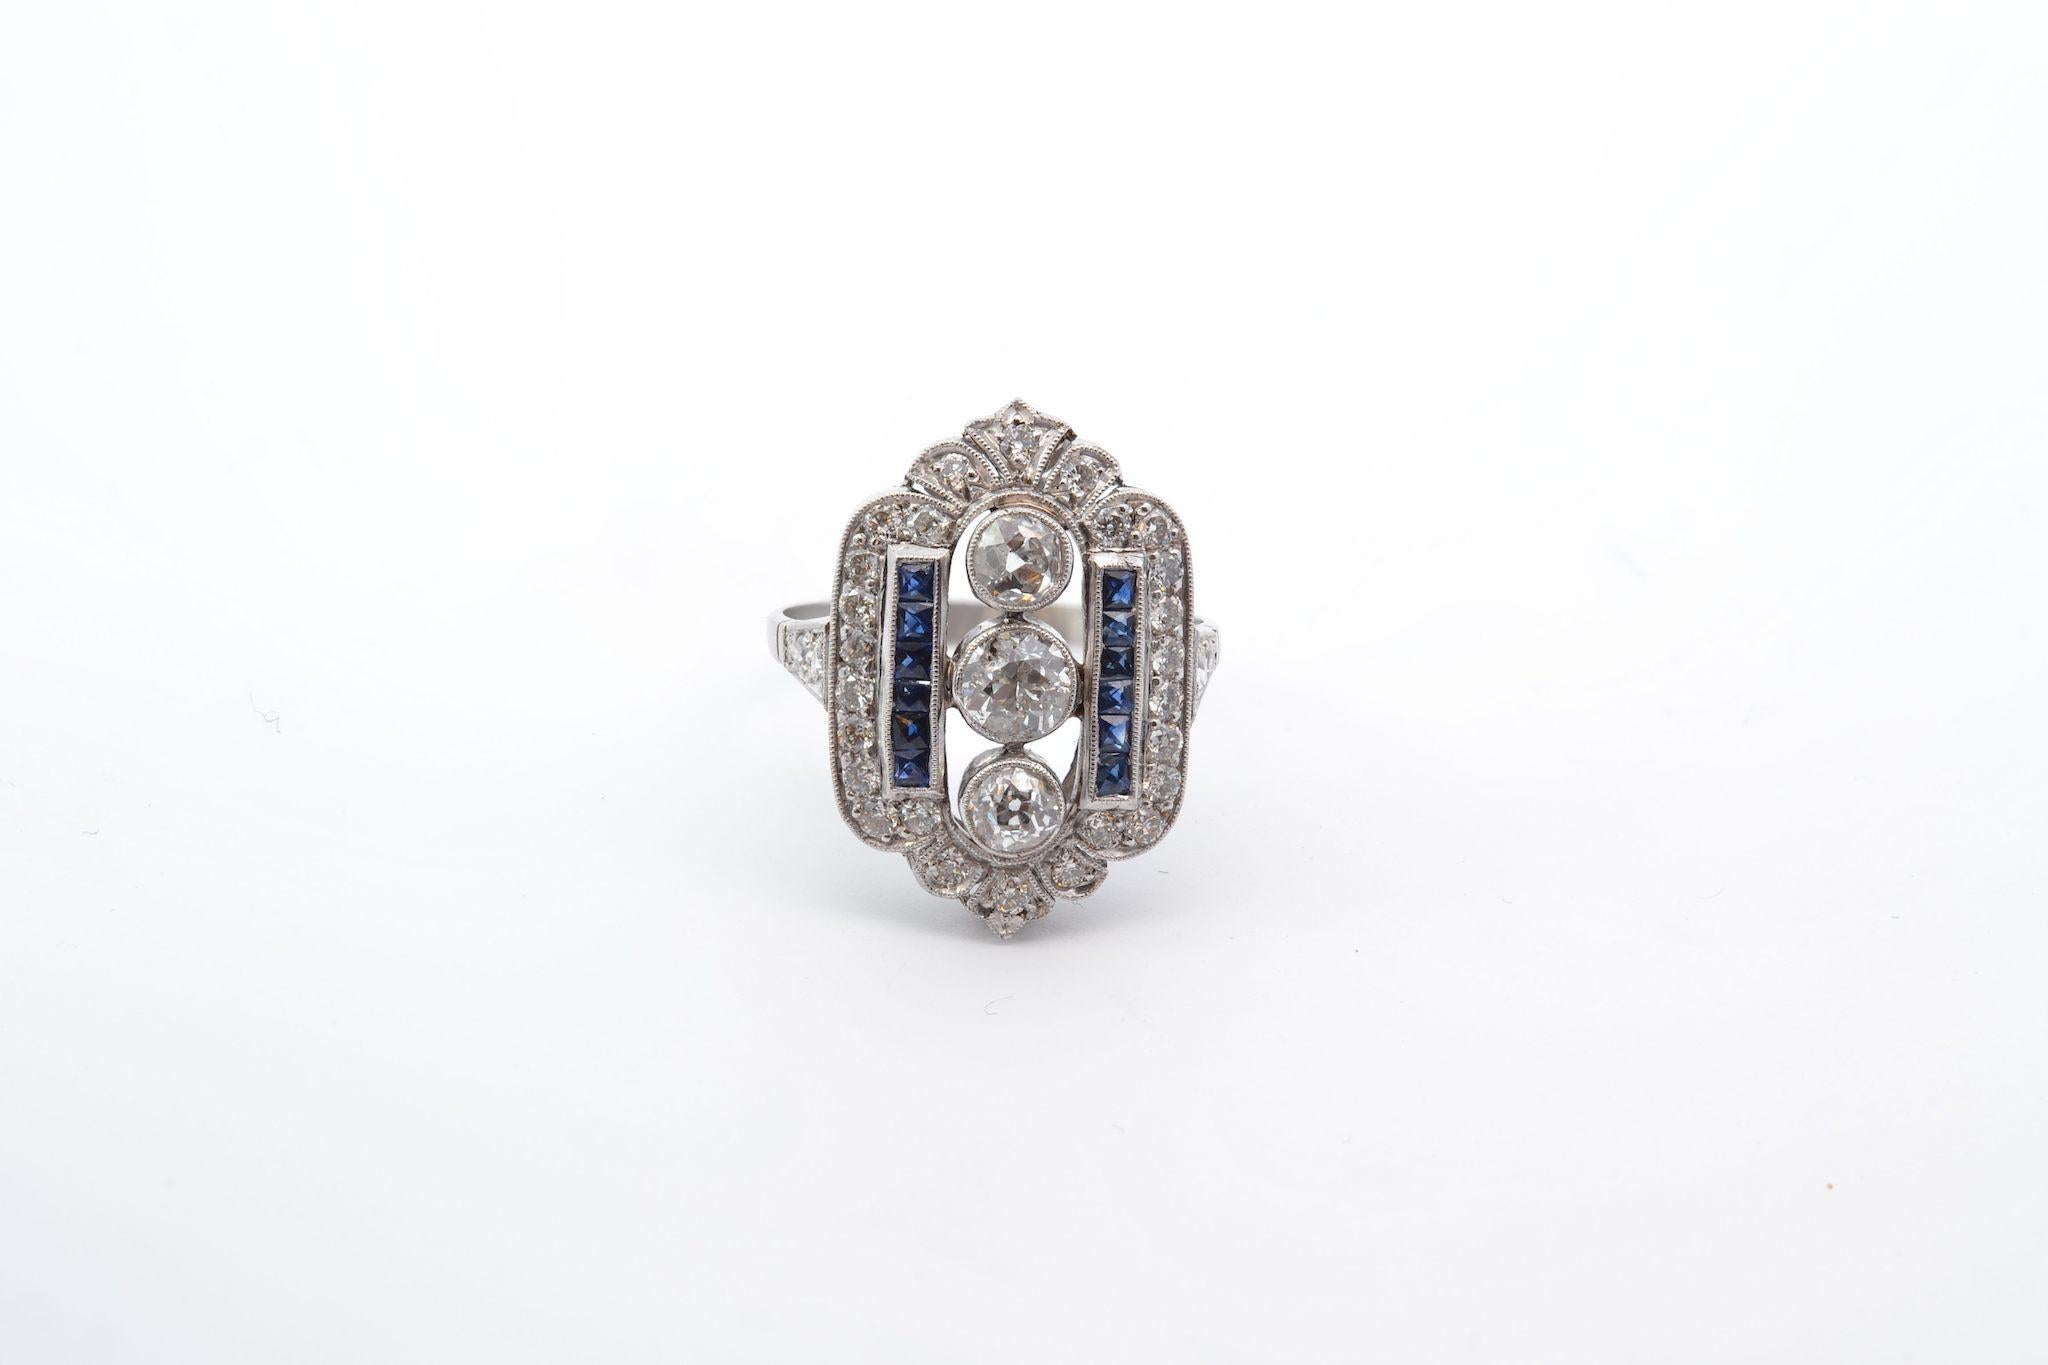 Stones: 33 diamonds: 1.75cts, 12 calibrated sapphires: 0.60ct
Material: Platinum
Dimensions: 2.3cm x 1.5cm
Weight: 6g
Period: Art Deco style
Size: 57 (free sizing)
Certificate
Ref. : 25175